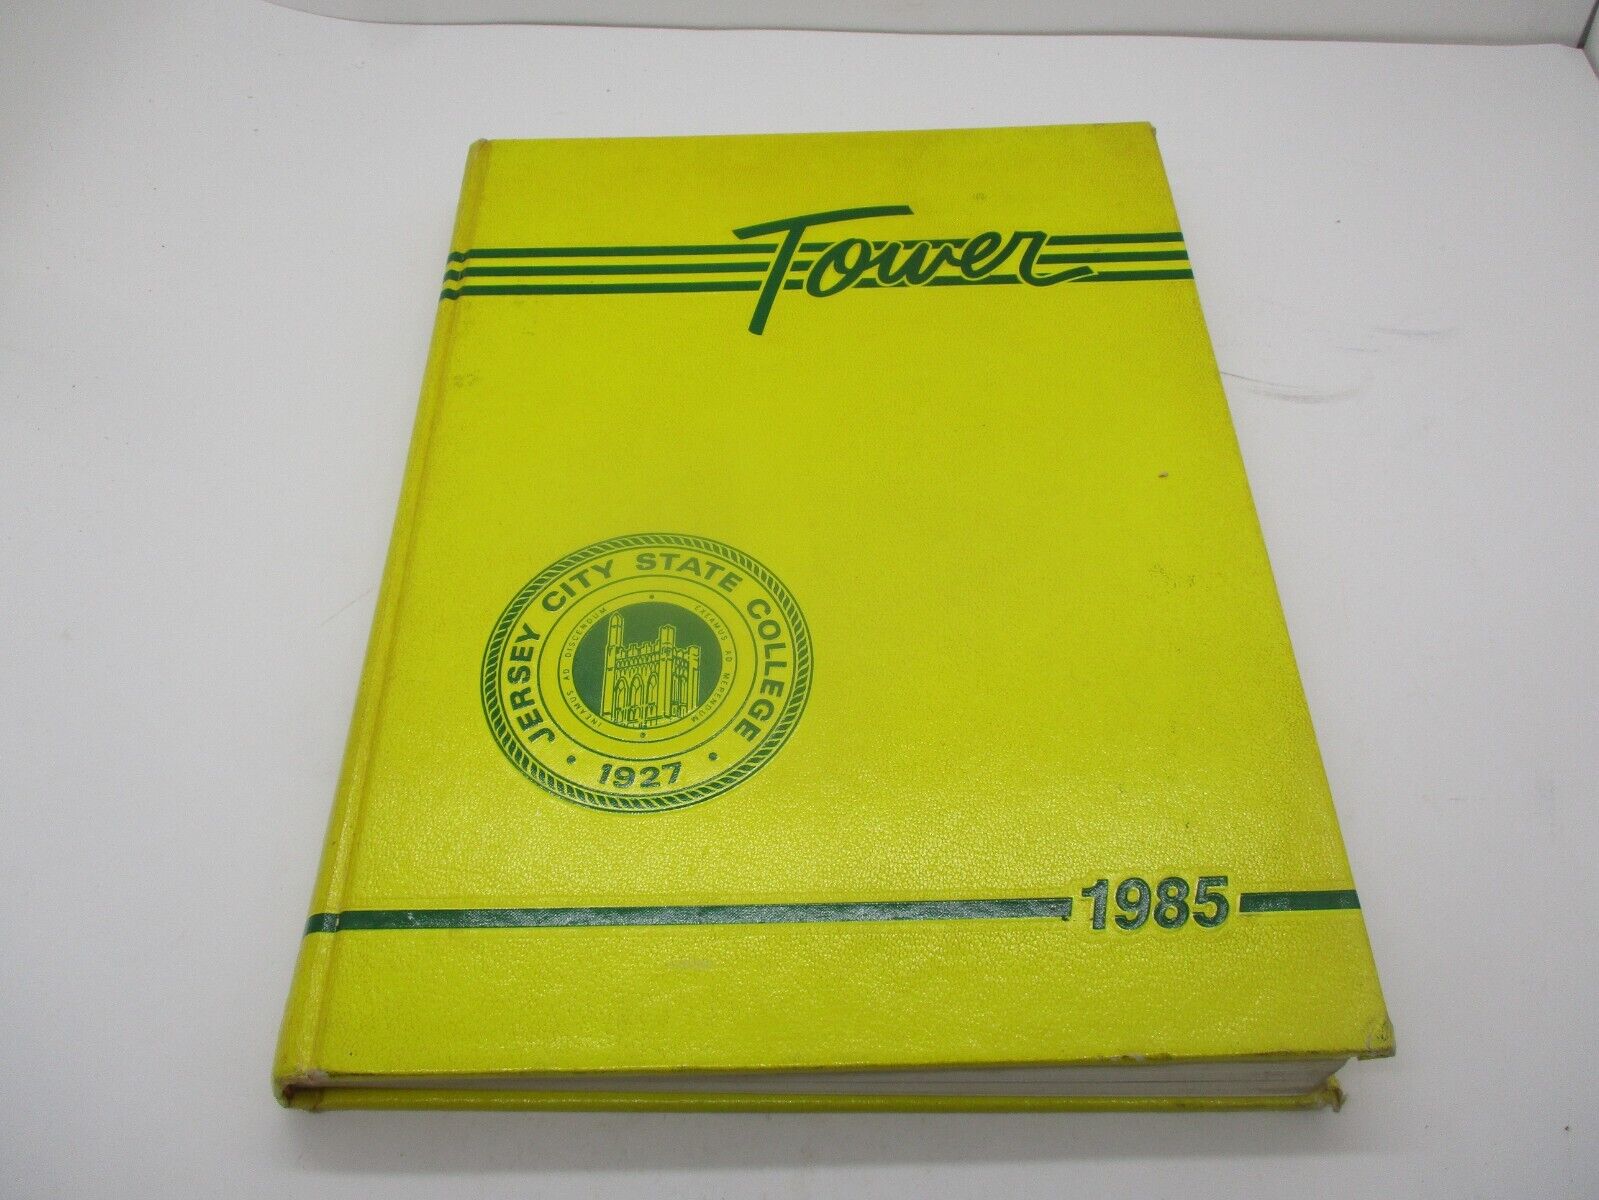 1985 TOWER JERSEY CITY NEW JERSEY STATE COLLEGE YEARBOOK